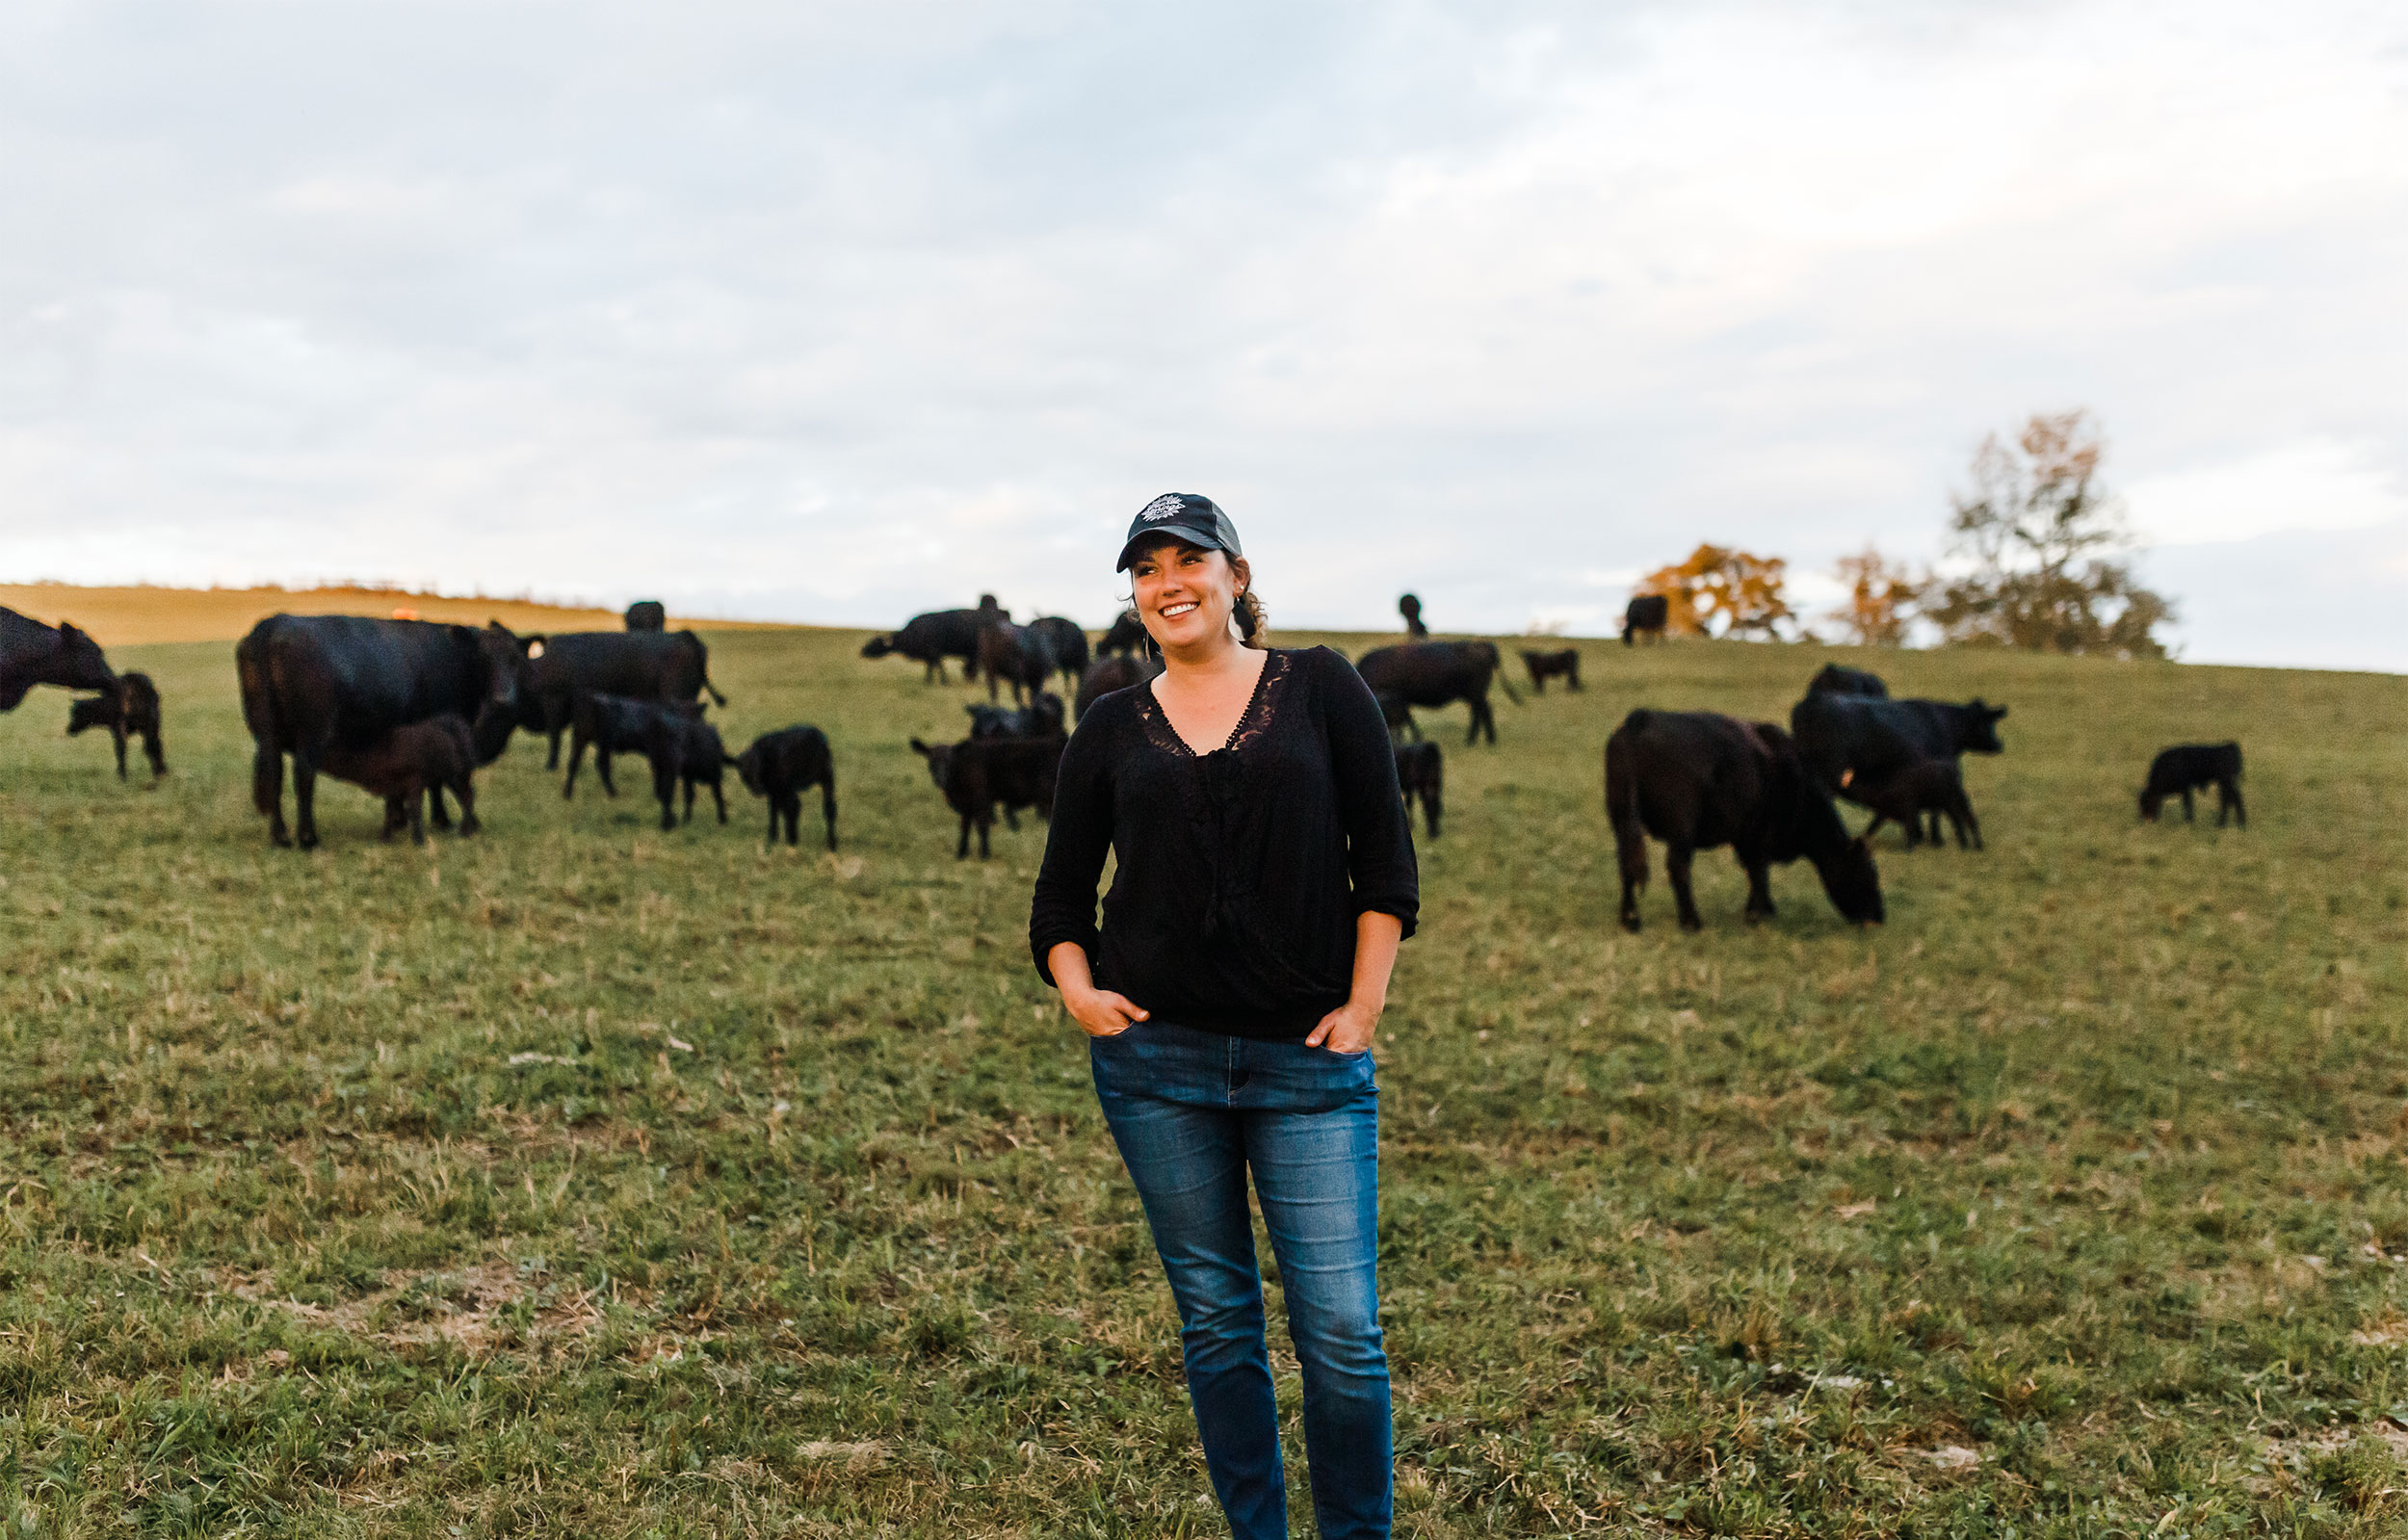 Women in farming: Courtney Umbarger '08